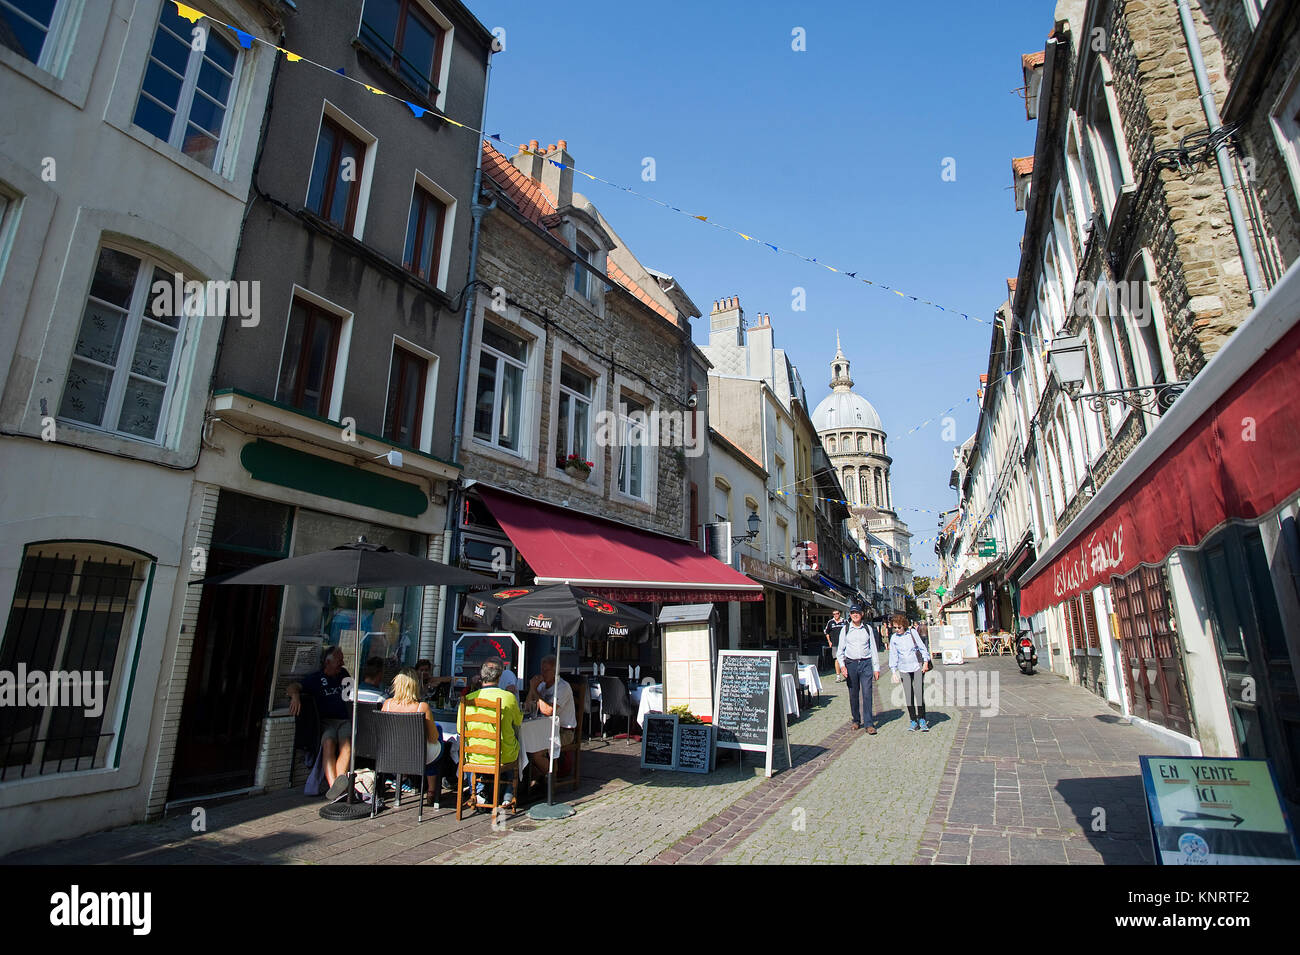 Shopping pedestrianized street in downtown Boulogne-sur-Mer (northern ...